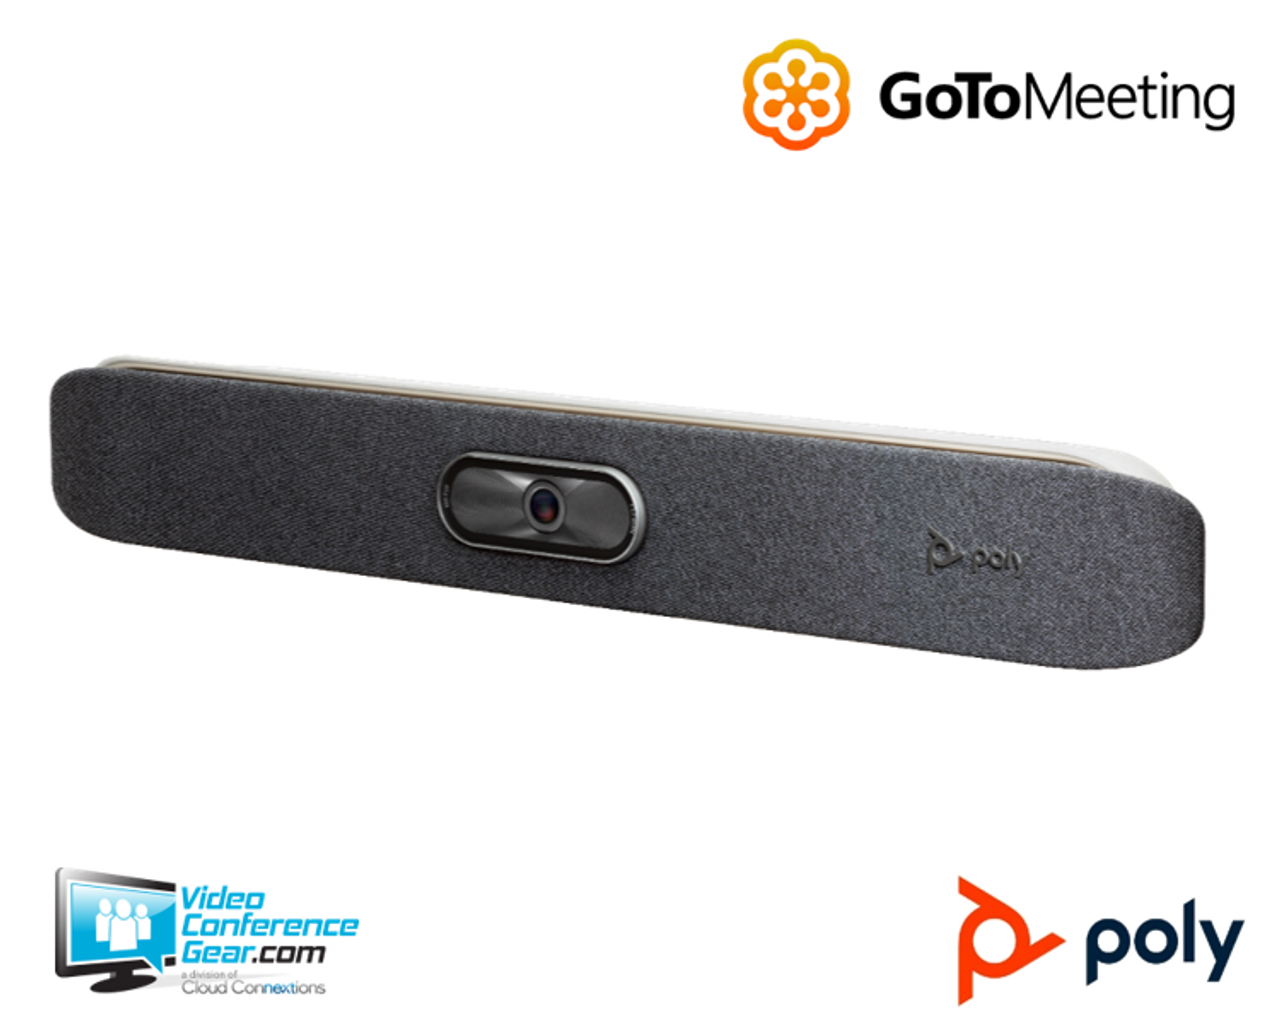 Poly Studio X30 Video Soundbar Bundled with the Poly TC8 Ready to Use with the GoTo Meeting Video Conferencing Platform 6230-86905-001